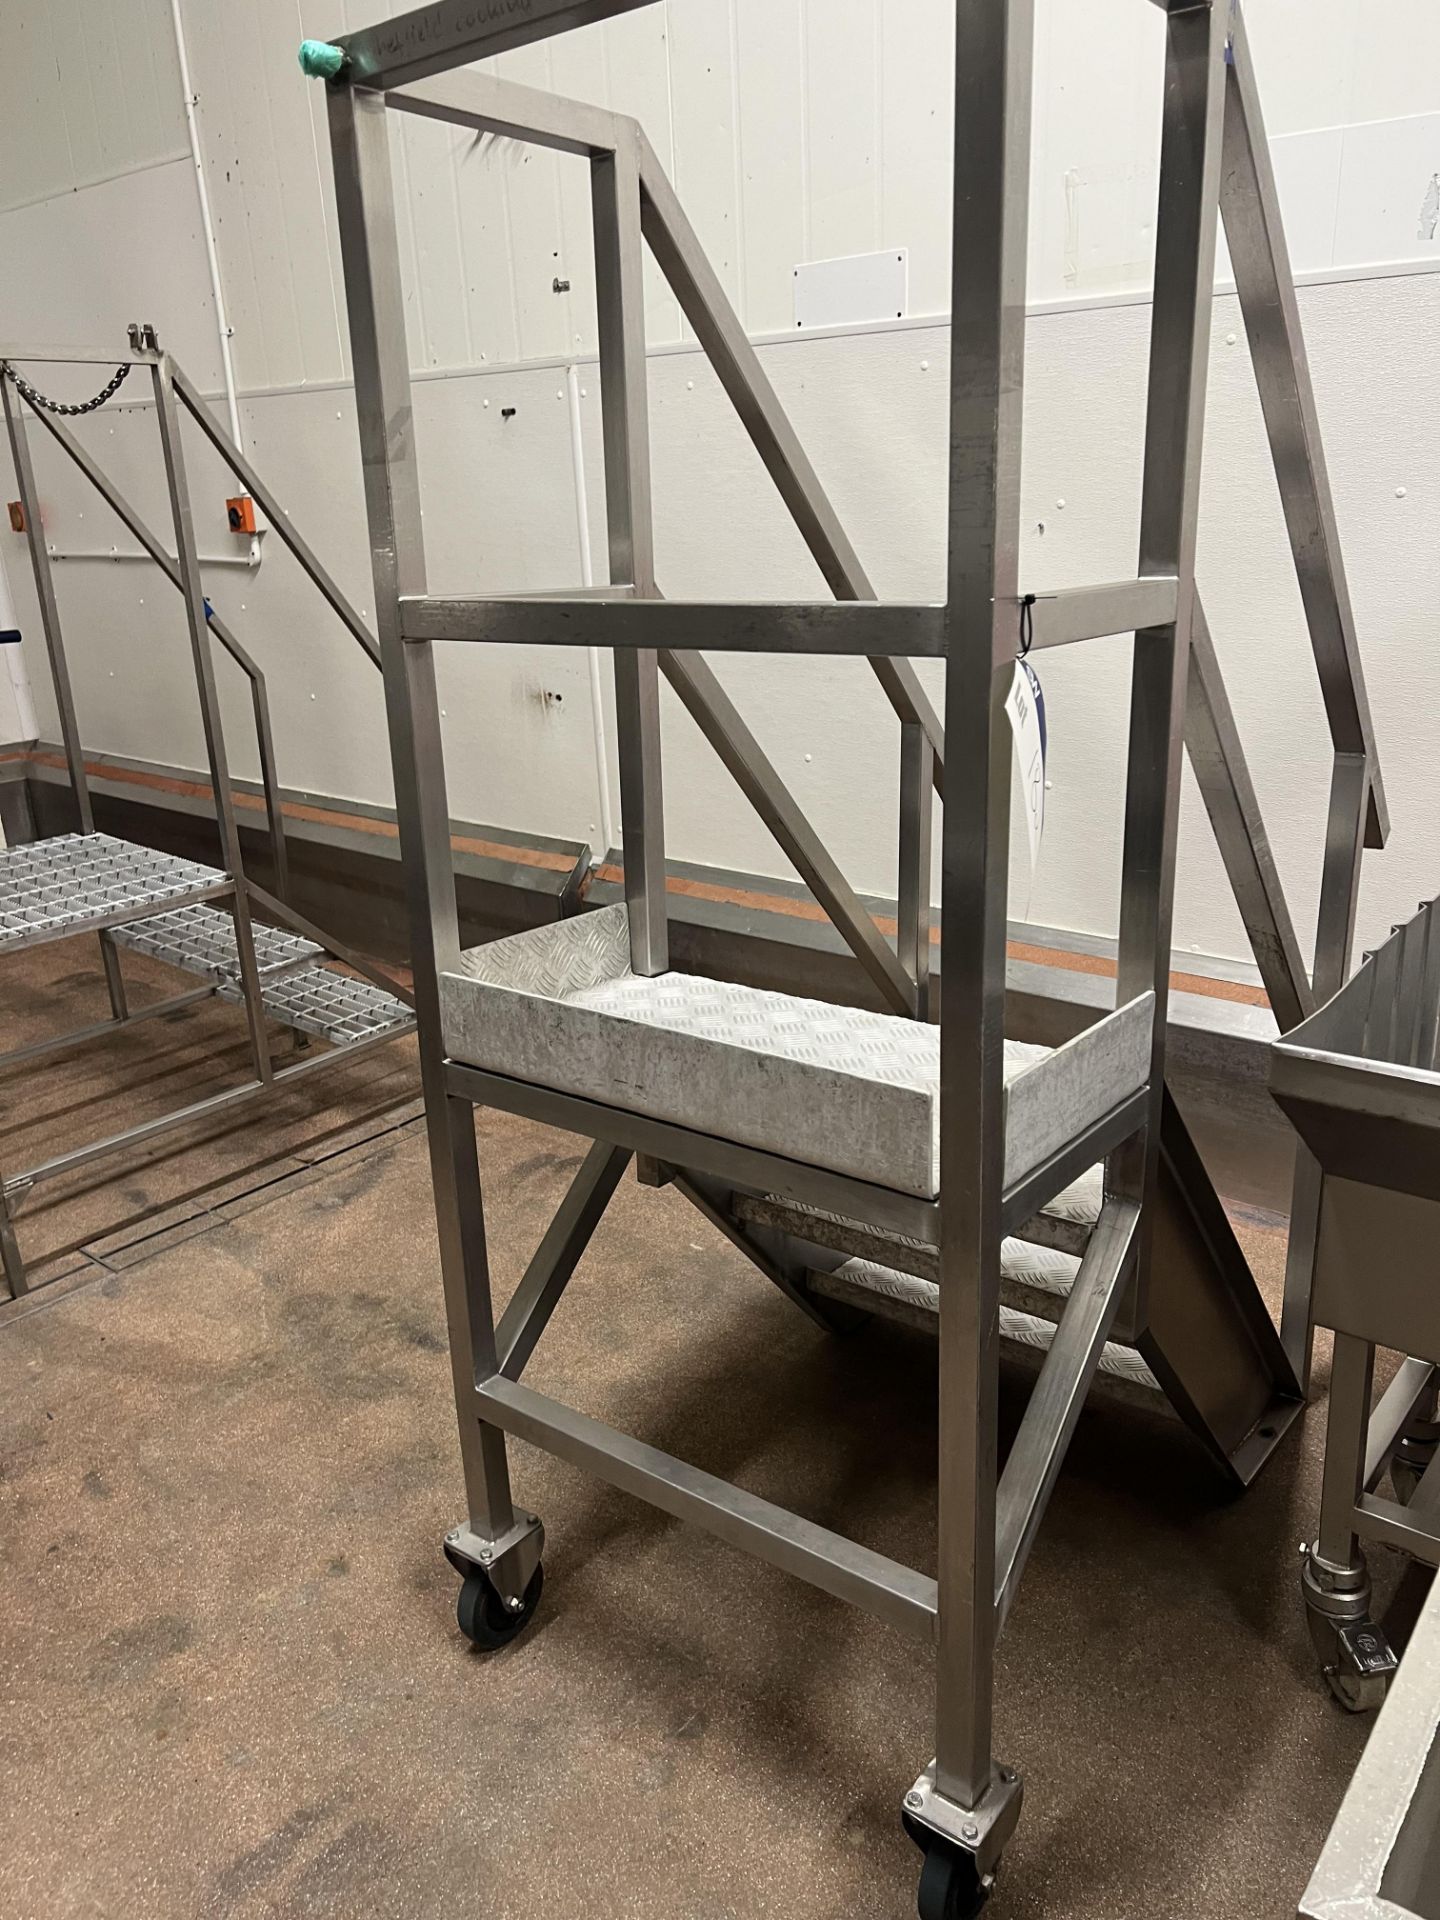 Four Rise Inspection Stand, with approx. 80cm high rails on three sides, 1.2m x 0.7m x 1.8m high